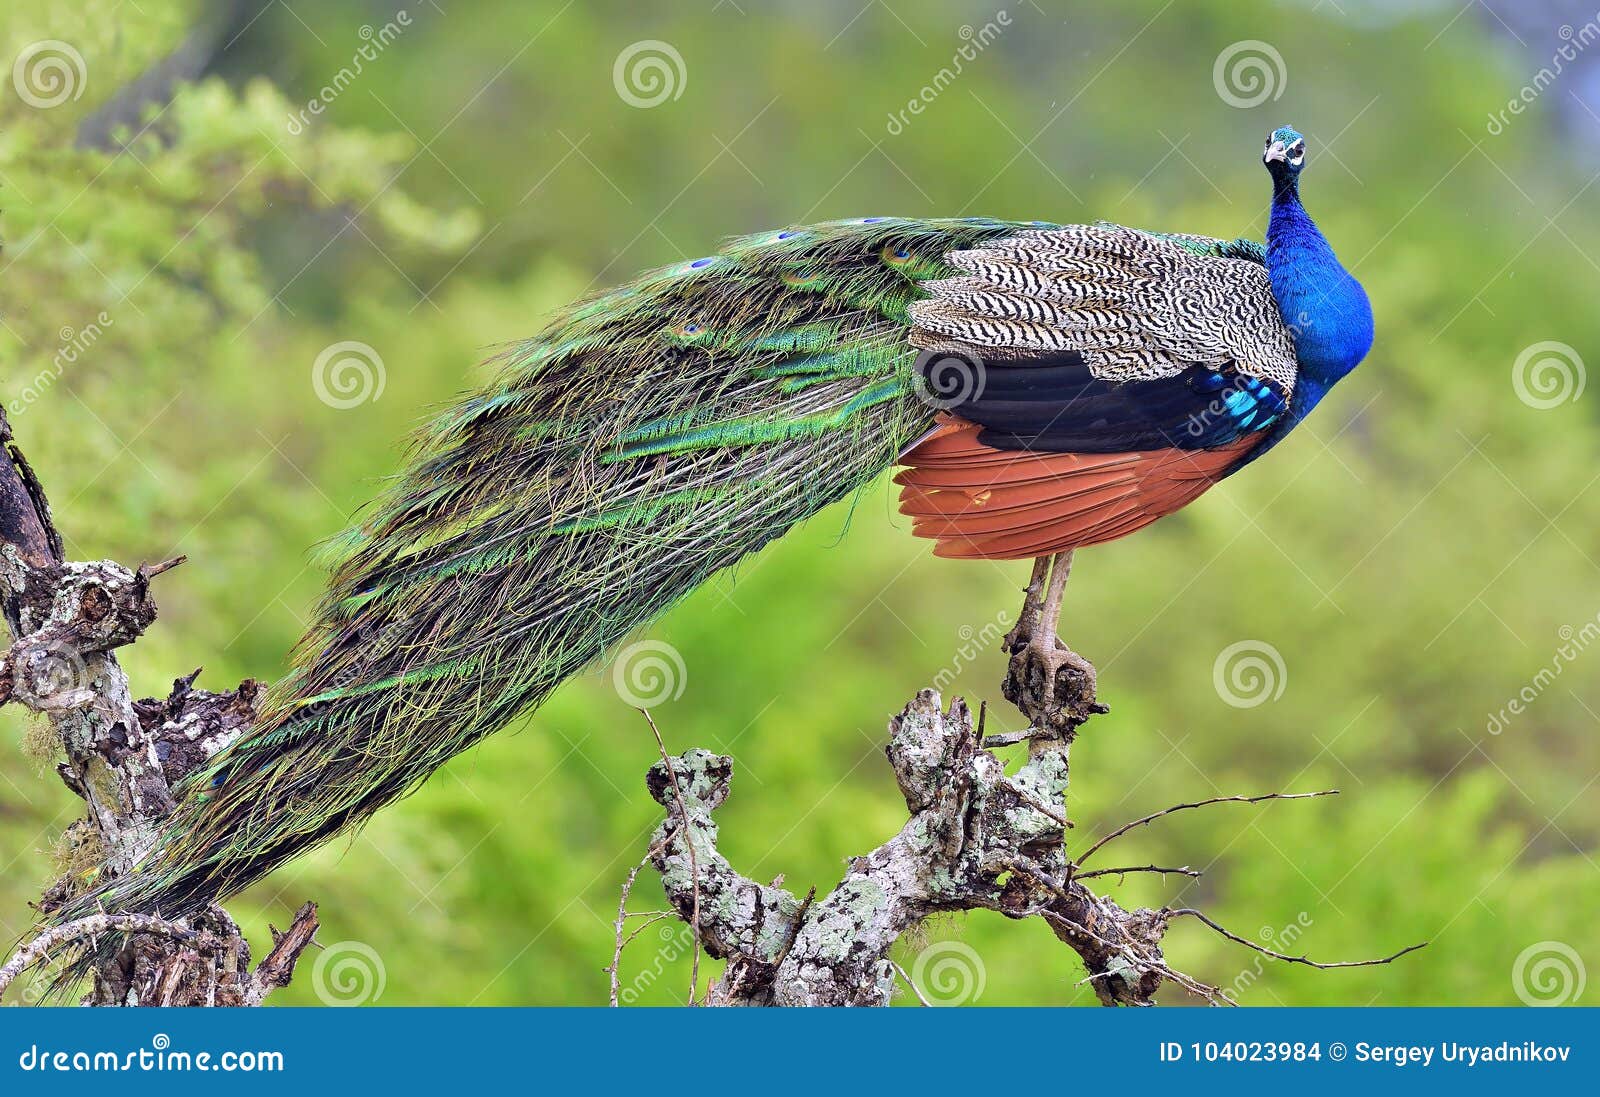 Portrait of Beautiful Peacock with Feathers Out. the Indian ...